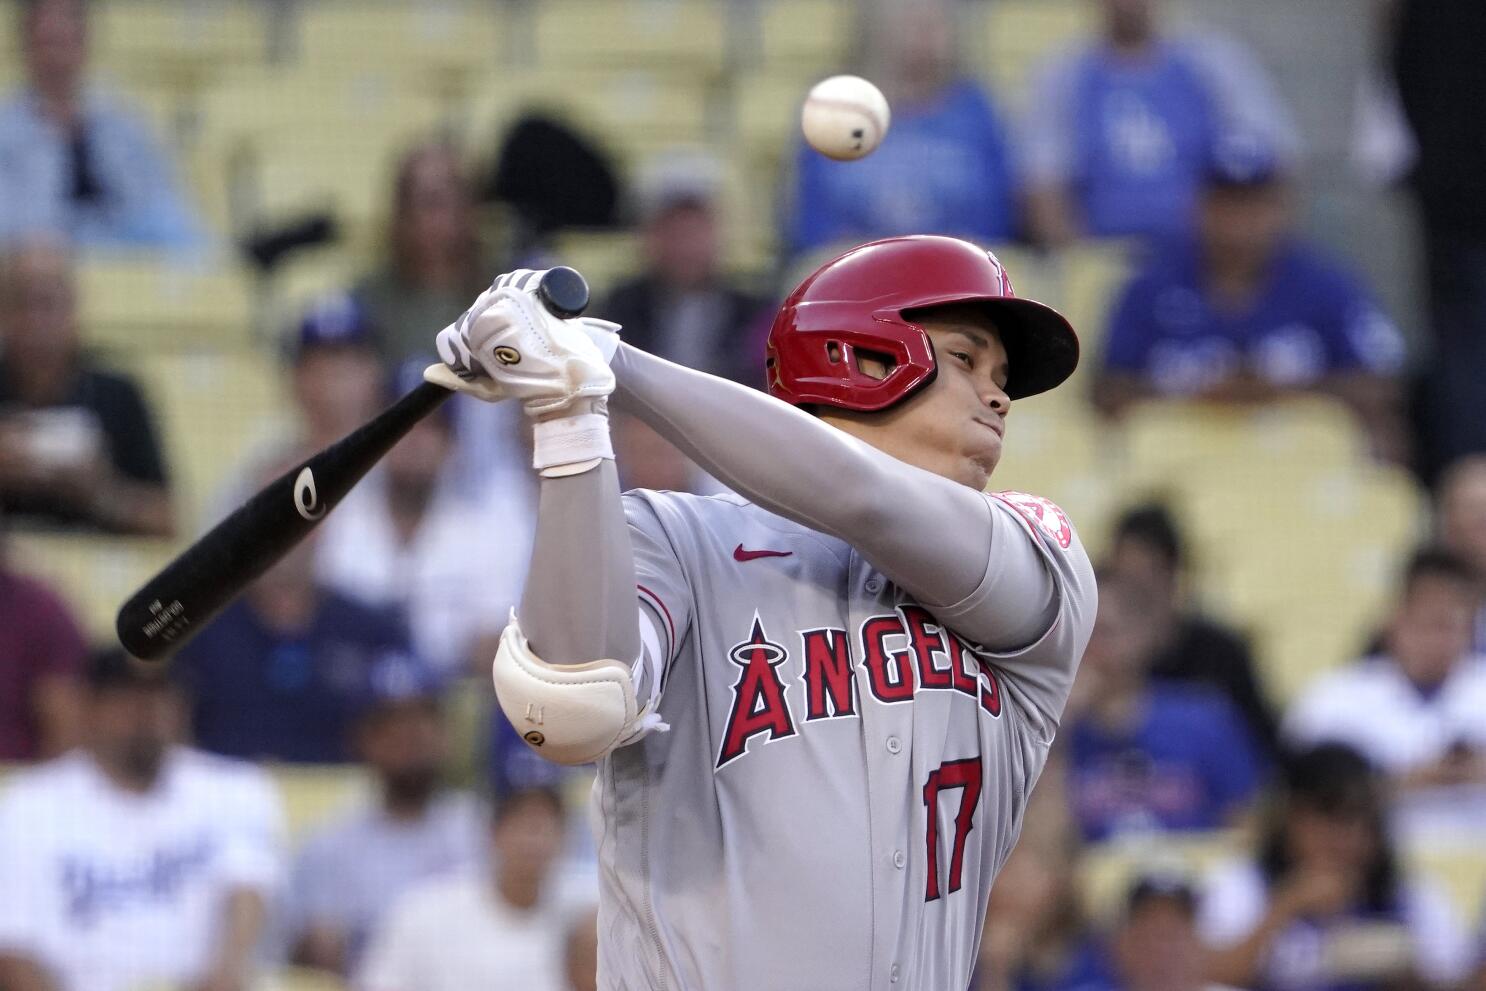 Shohei Ohtani's first official BP with Angels shows he can perform